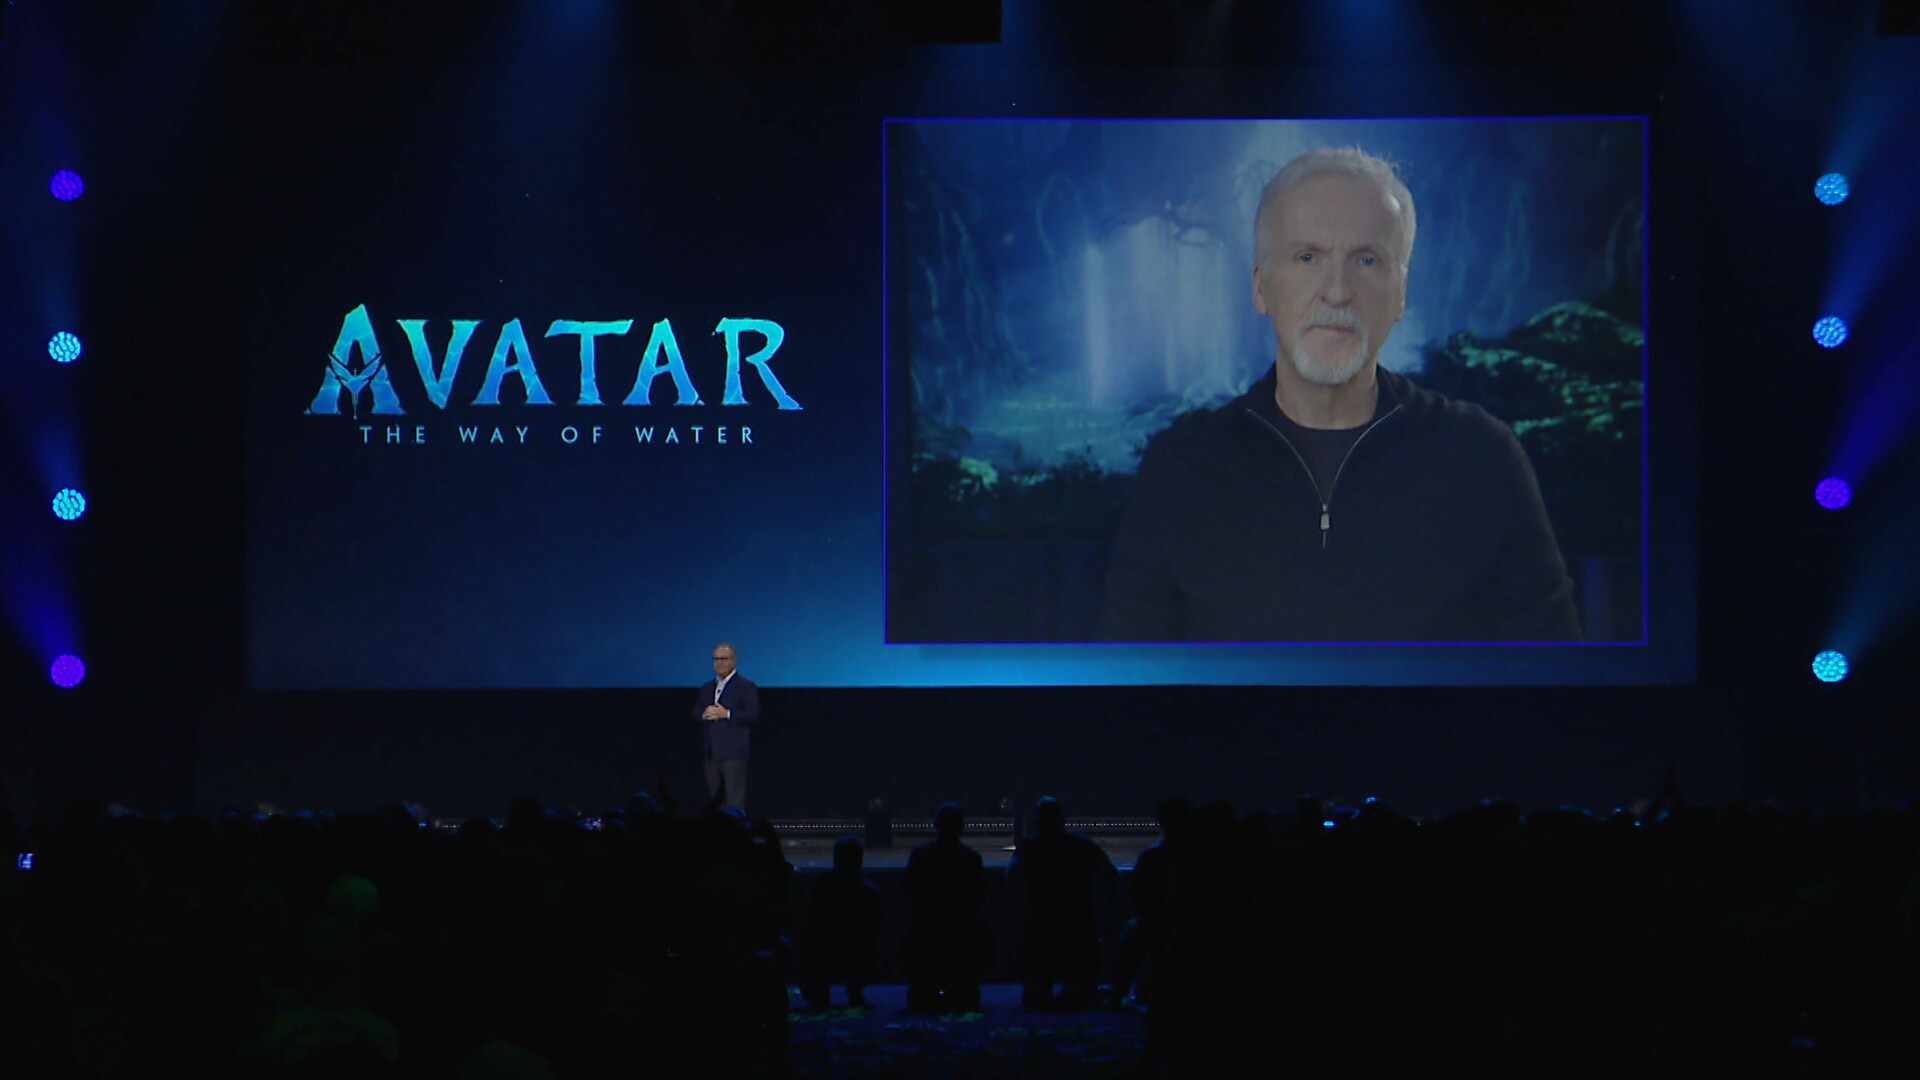 James Cameron on a large video screen with the title "Avatar: The Way of Water".